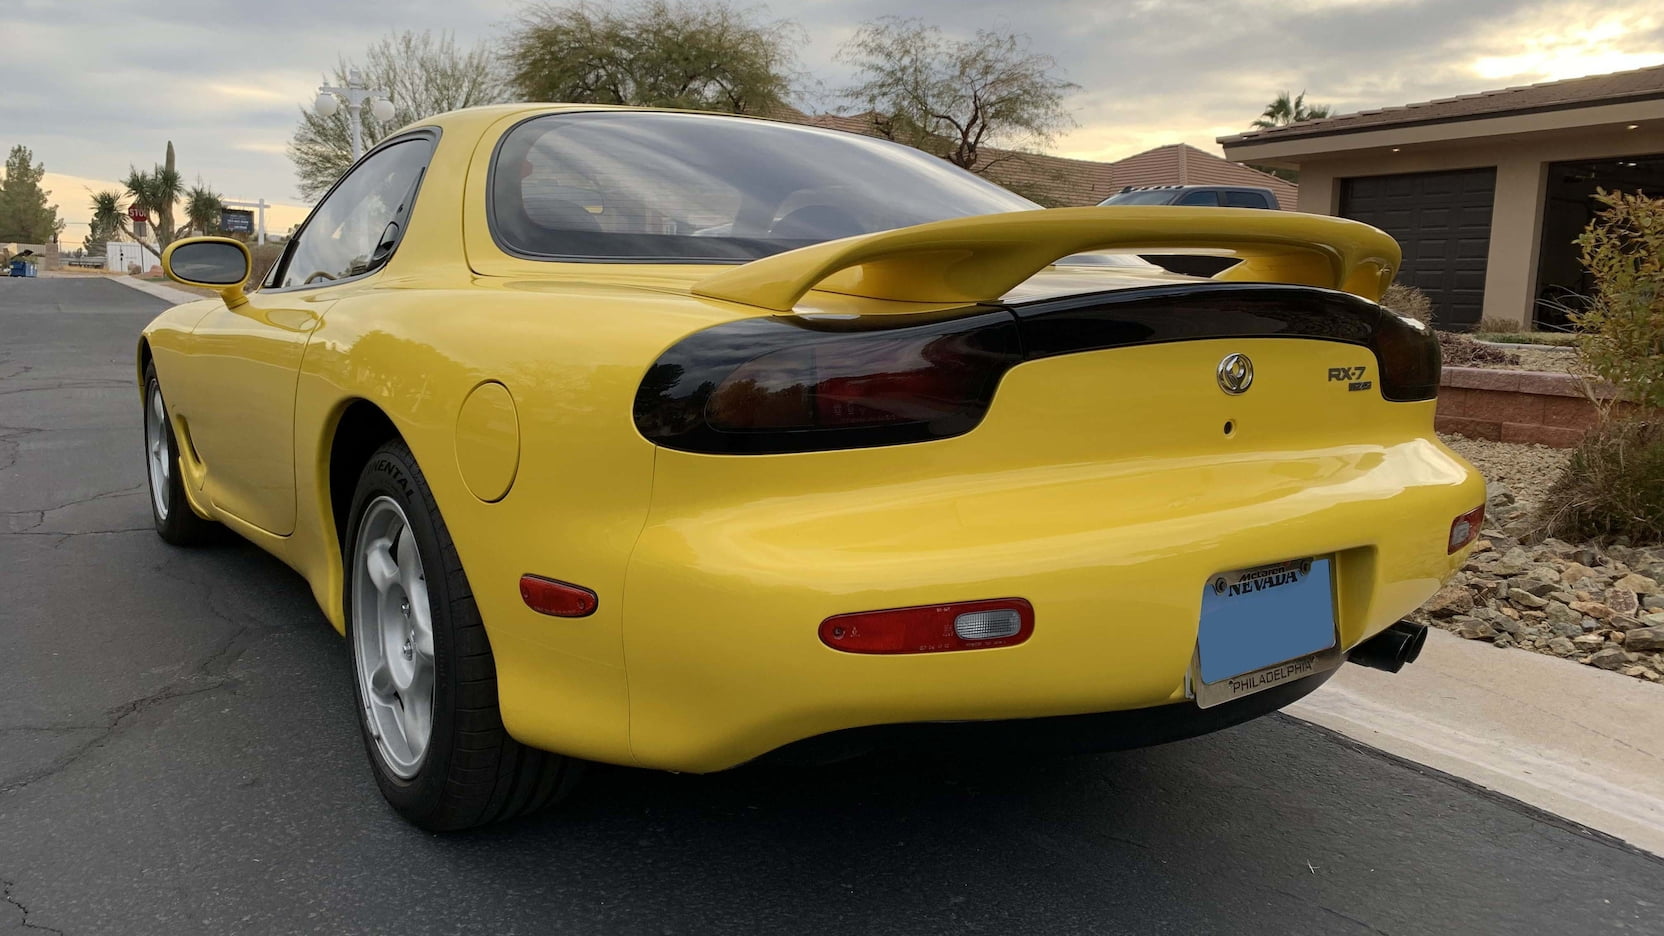 This Is What A Pristine Mazda RX-7 FD With 9,500 Miles Looks Like